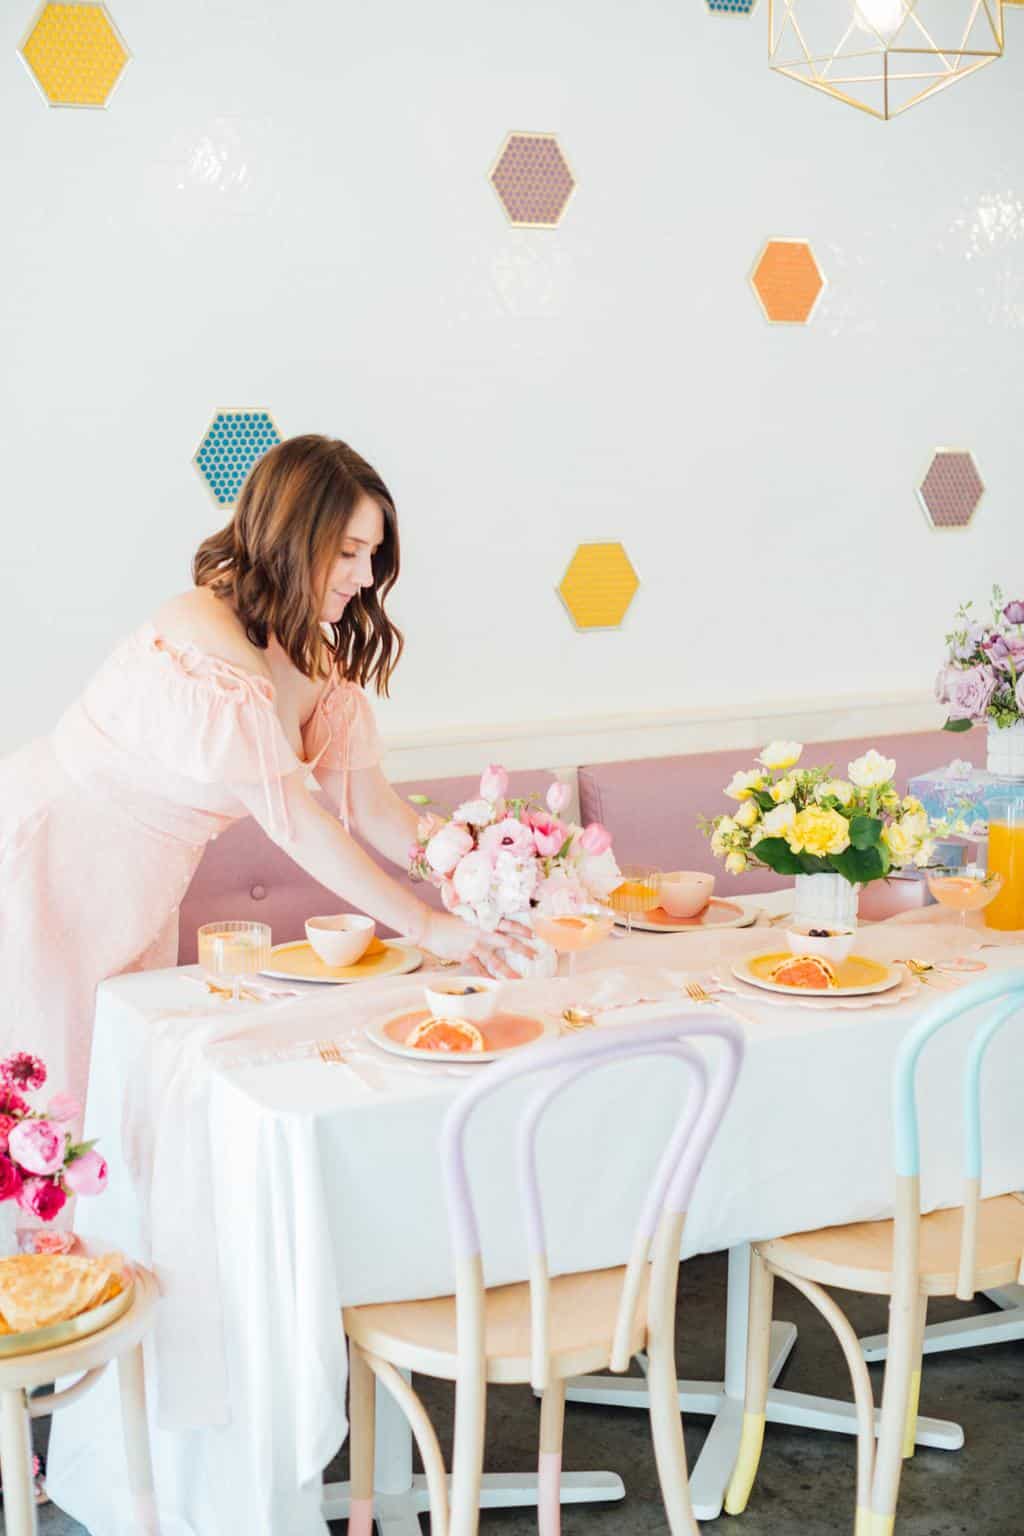 pastel tablescape - A Perfectly Pastel Easter Table Idea by top Houston lifestyle blogger Ashley Rose of Sugar & Cloth #diy #tablescape #ideas #easter #pastel #party #decorations #brunch #bridalshower #bridal #shower #baby